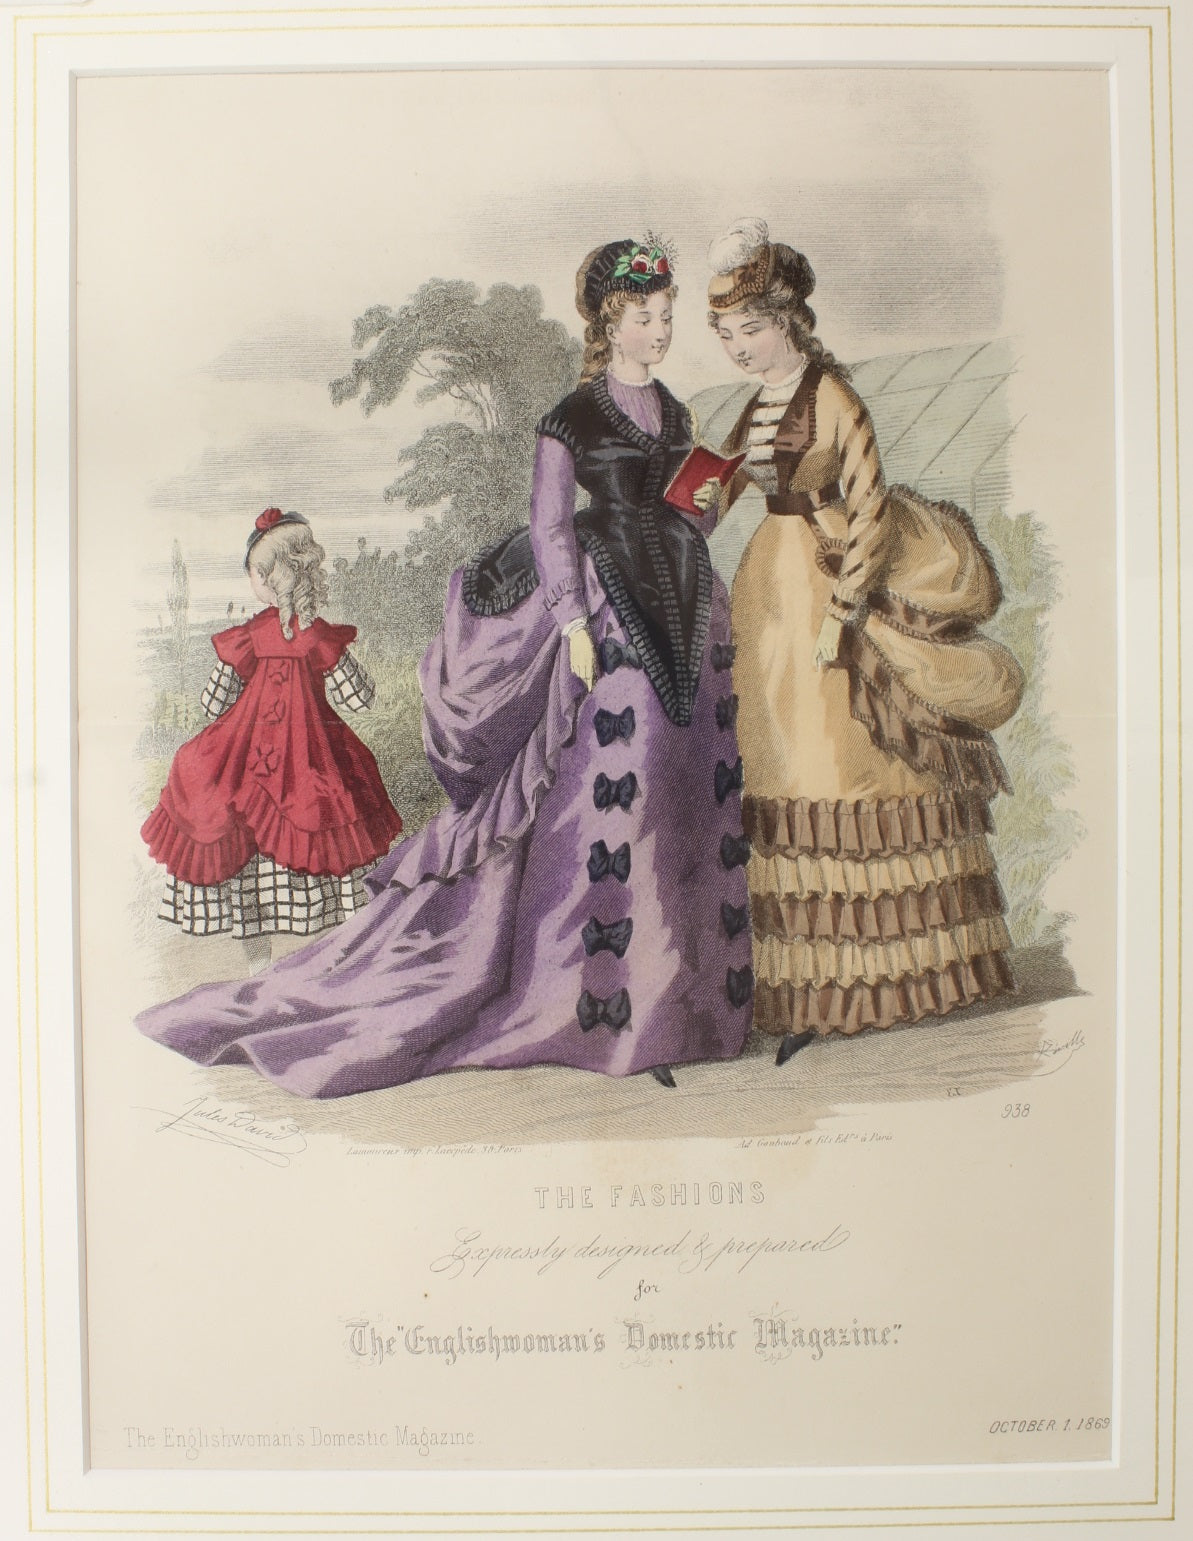 The Fashions by Jules David Oct 1869